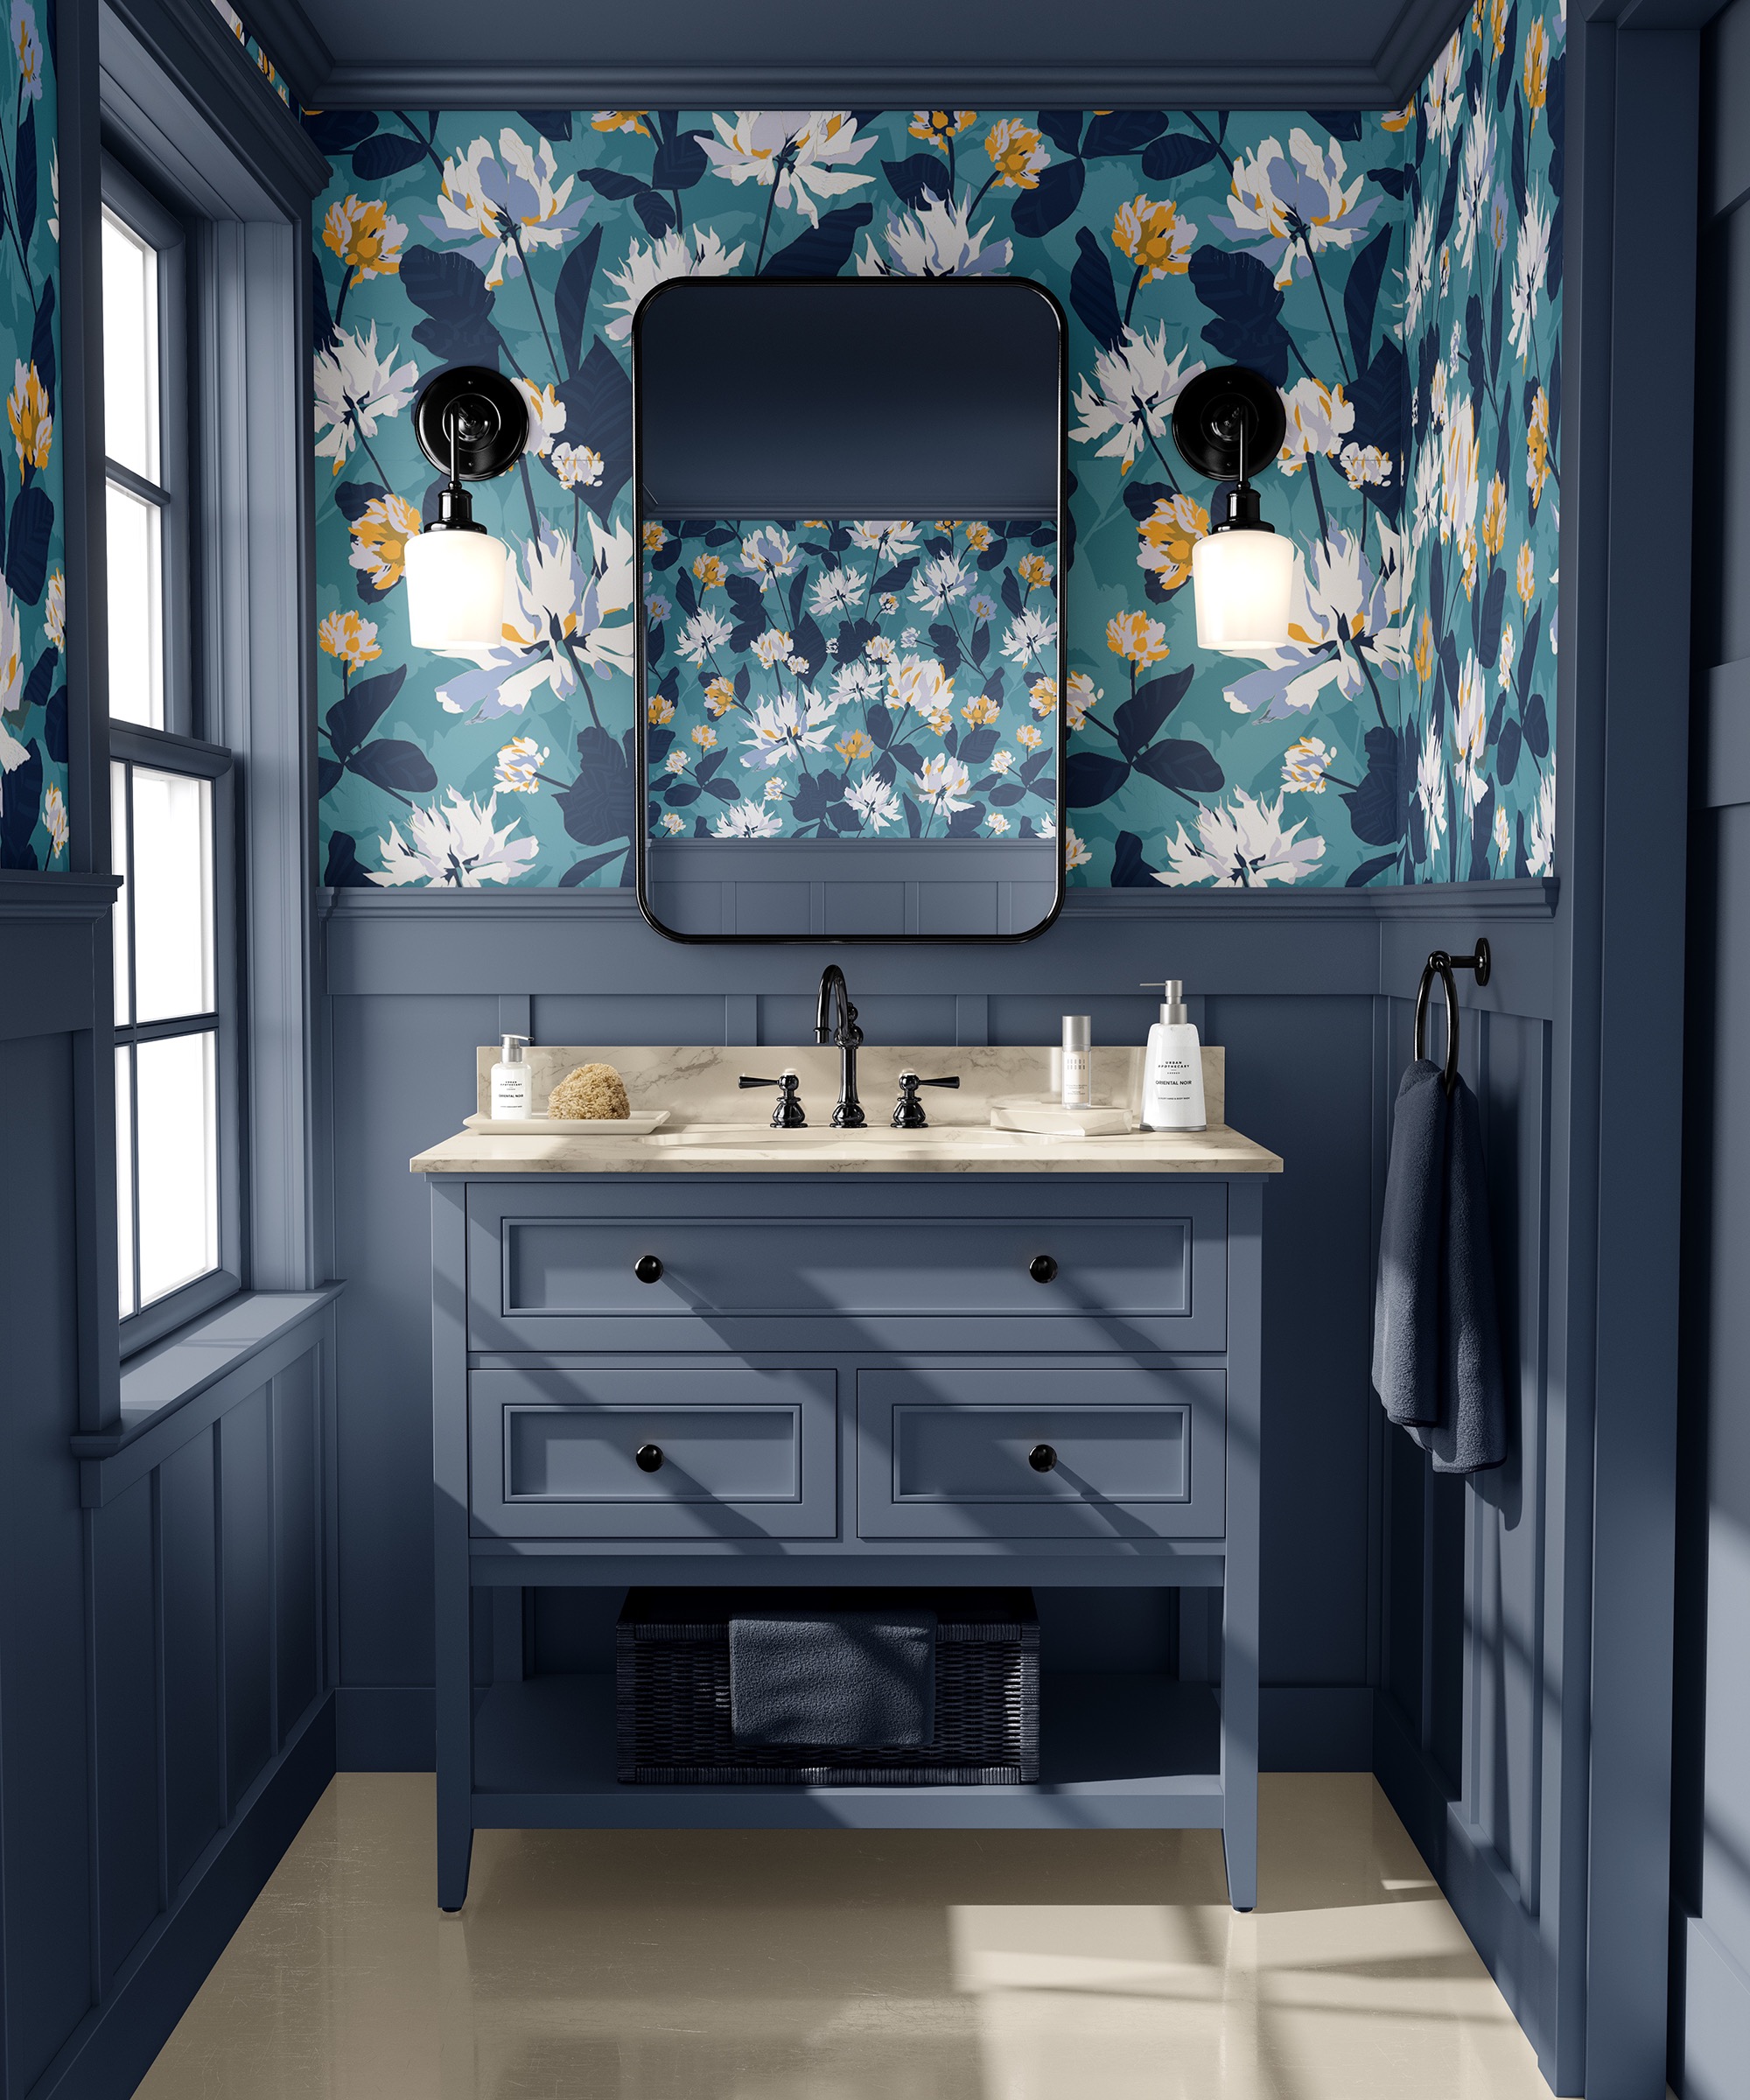 Bathroom in blue-grey with clover flowers wallpaper in blues and yellows